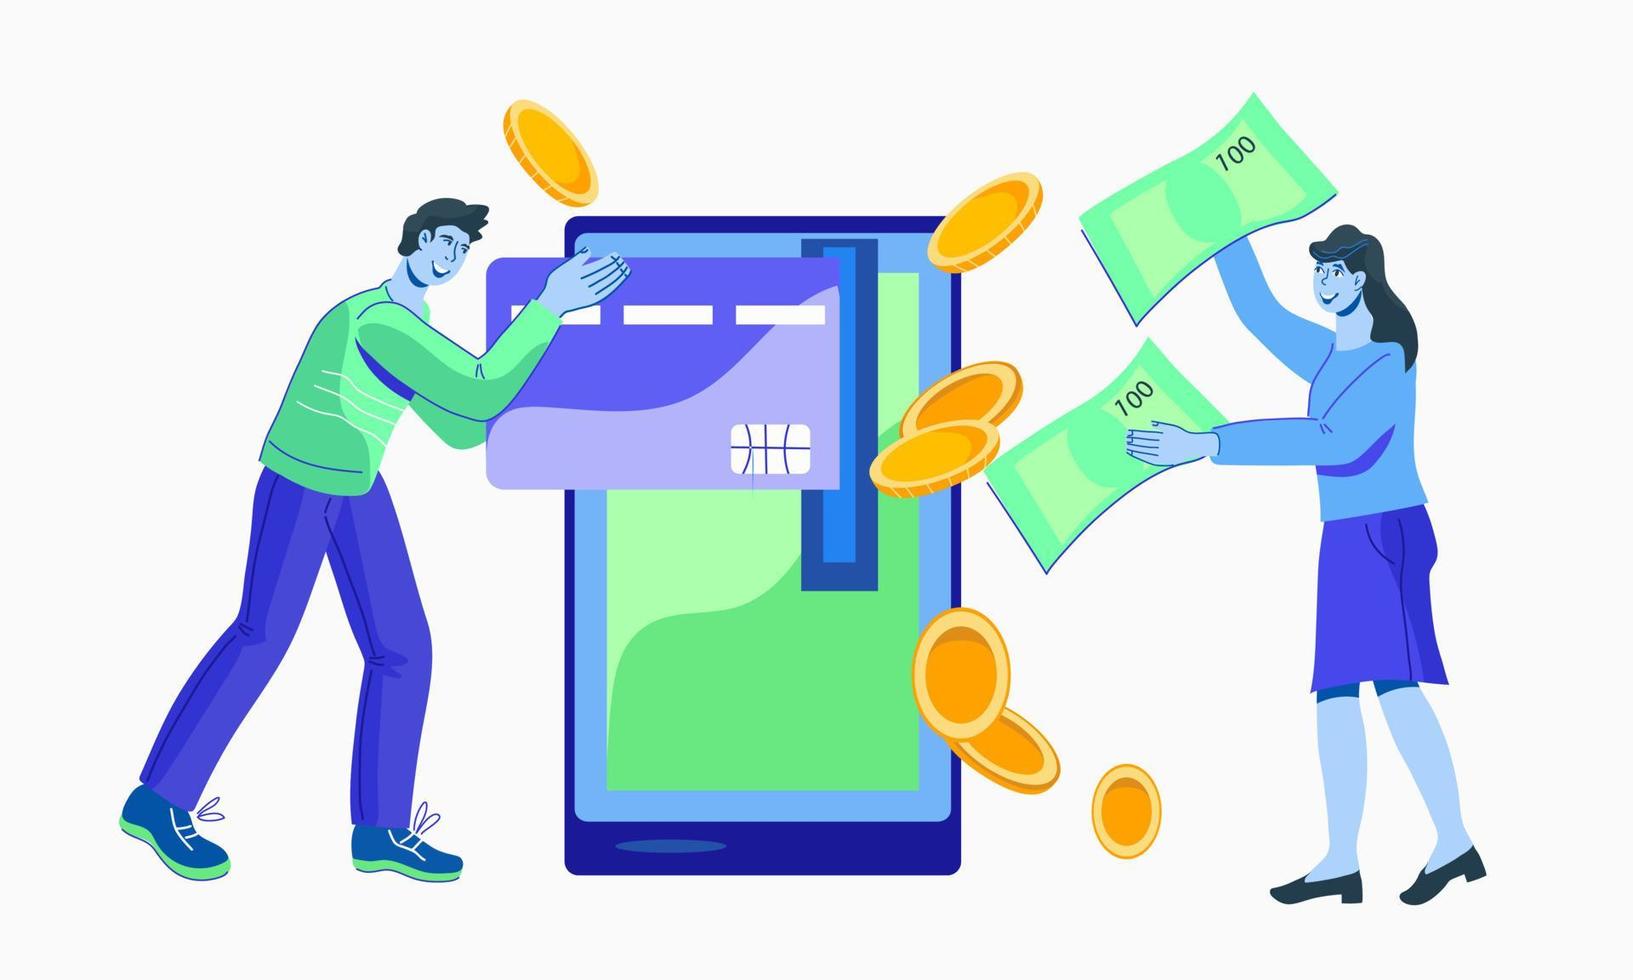 Mobile payment concept with people characters withdrawing cash and paying online. Credit card and account banking operations, money transfer. Vector illustration isolated.